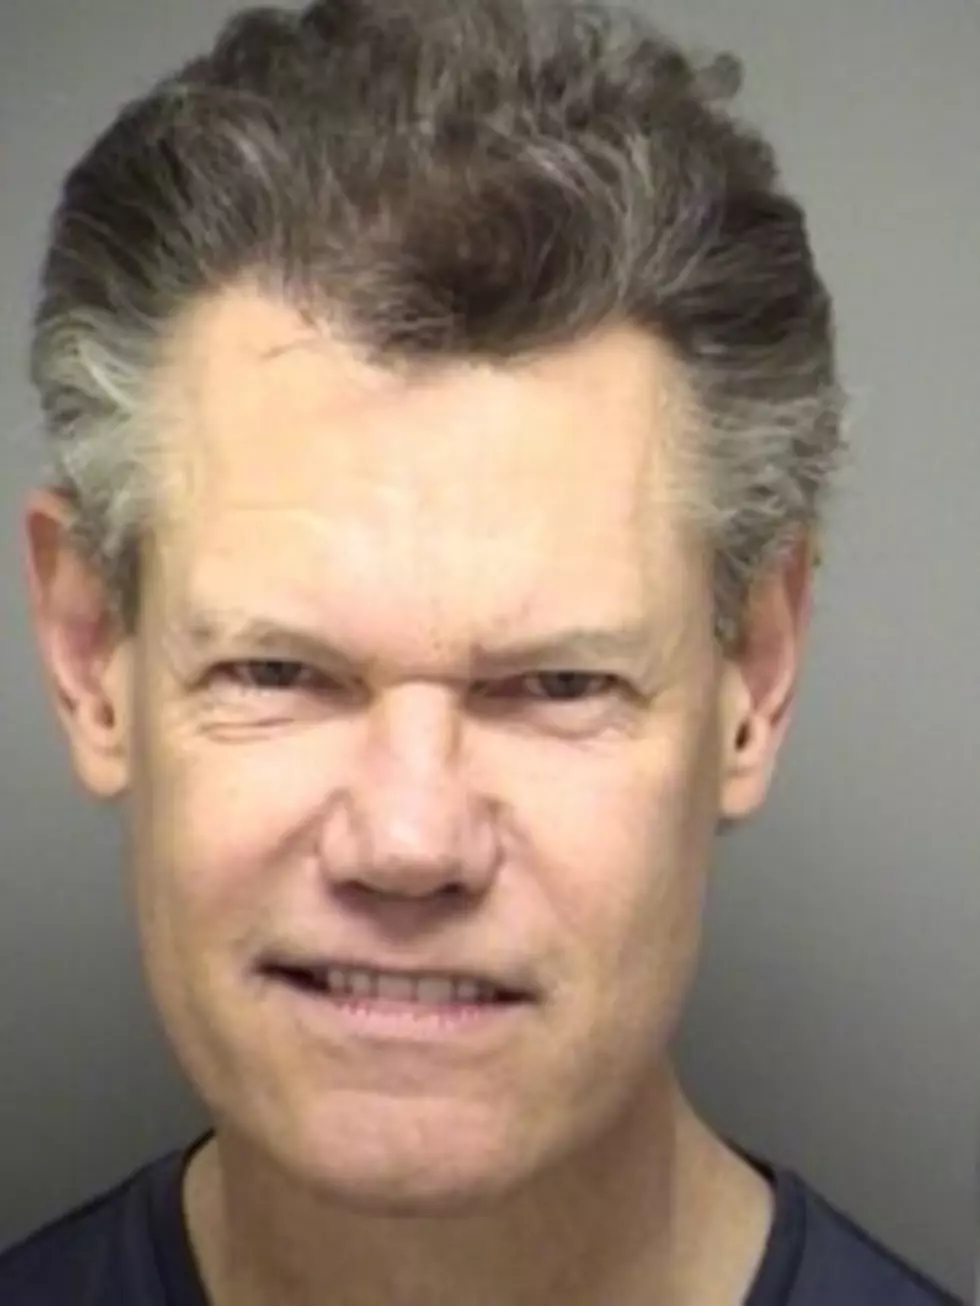 Randy Travis Arrested For Being Drunk In Public